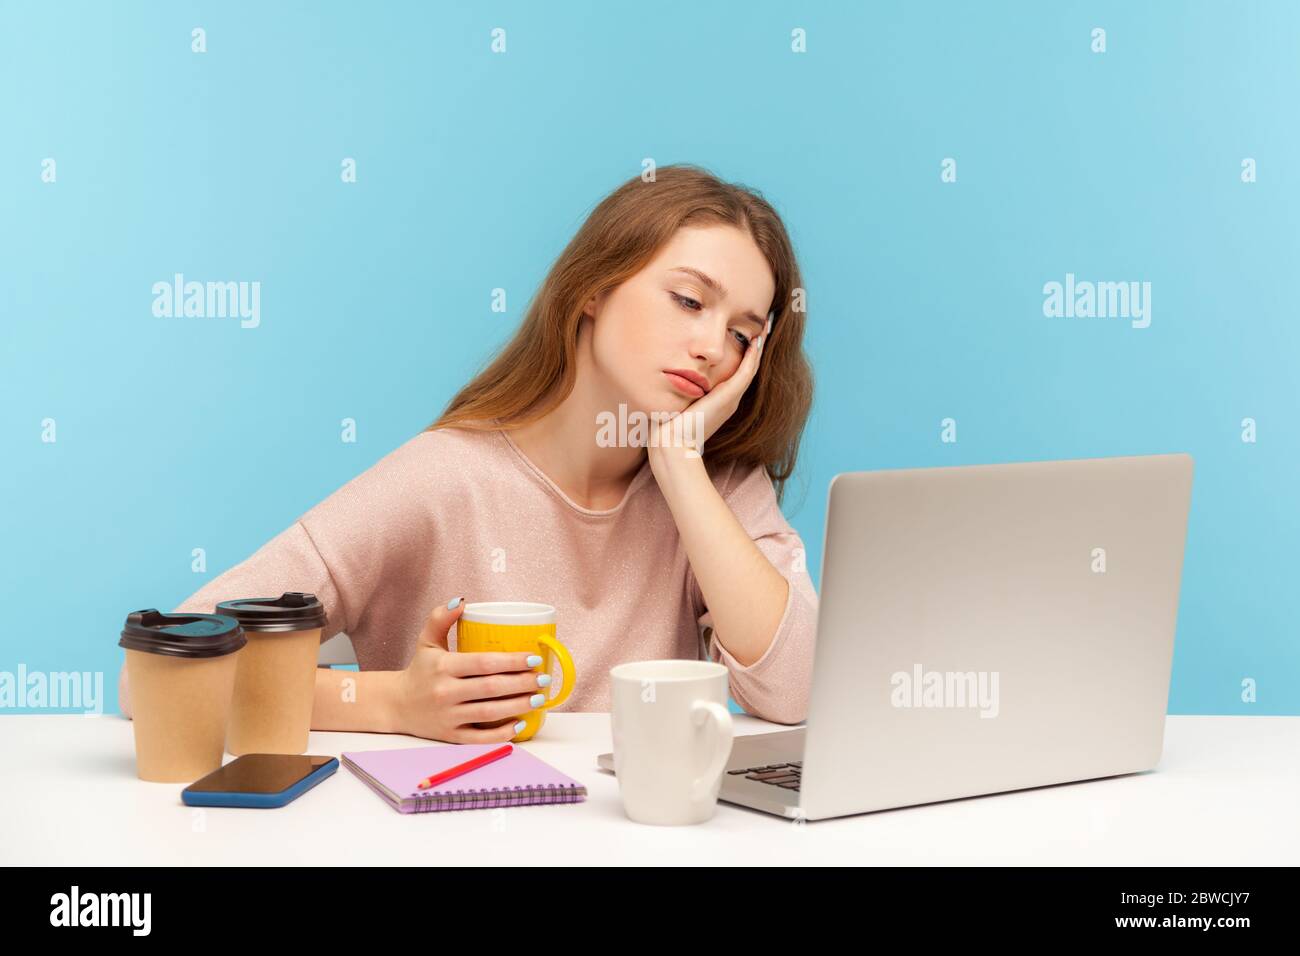 Exhausted bored woman, office employee surrounded by coffee cups in workplace, looking at laptop screen with indifferent apathetic face, overtime work Stock Photo